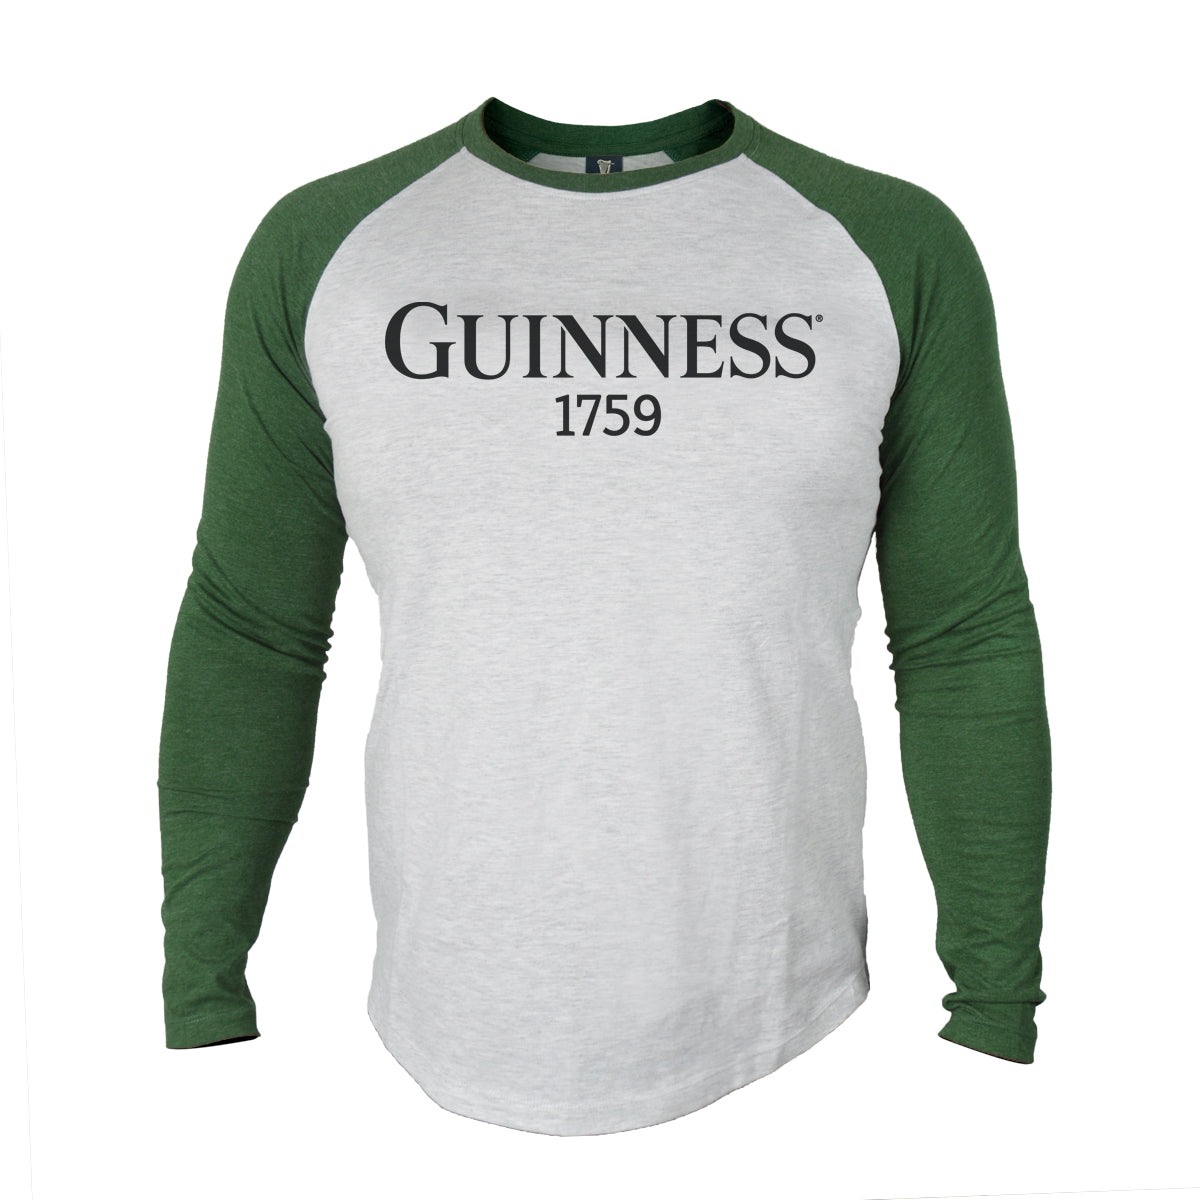 The Guinness baseball t-shirt, perfect for casual wear.